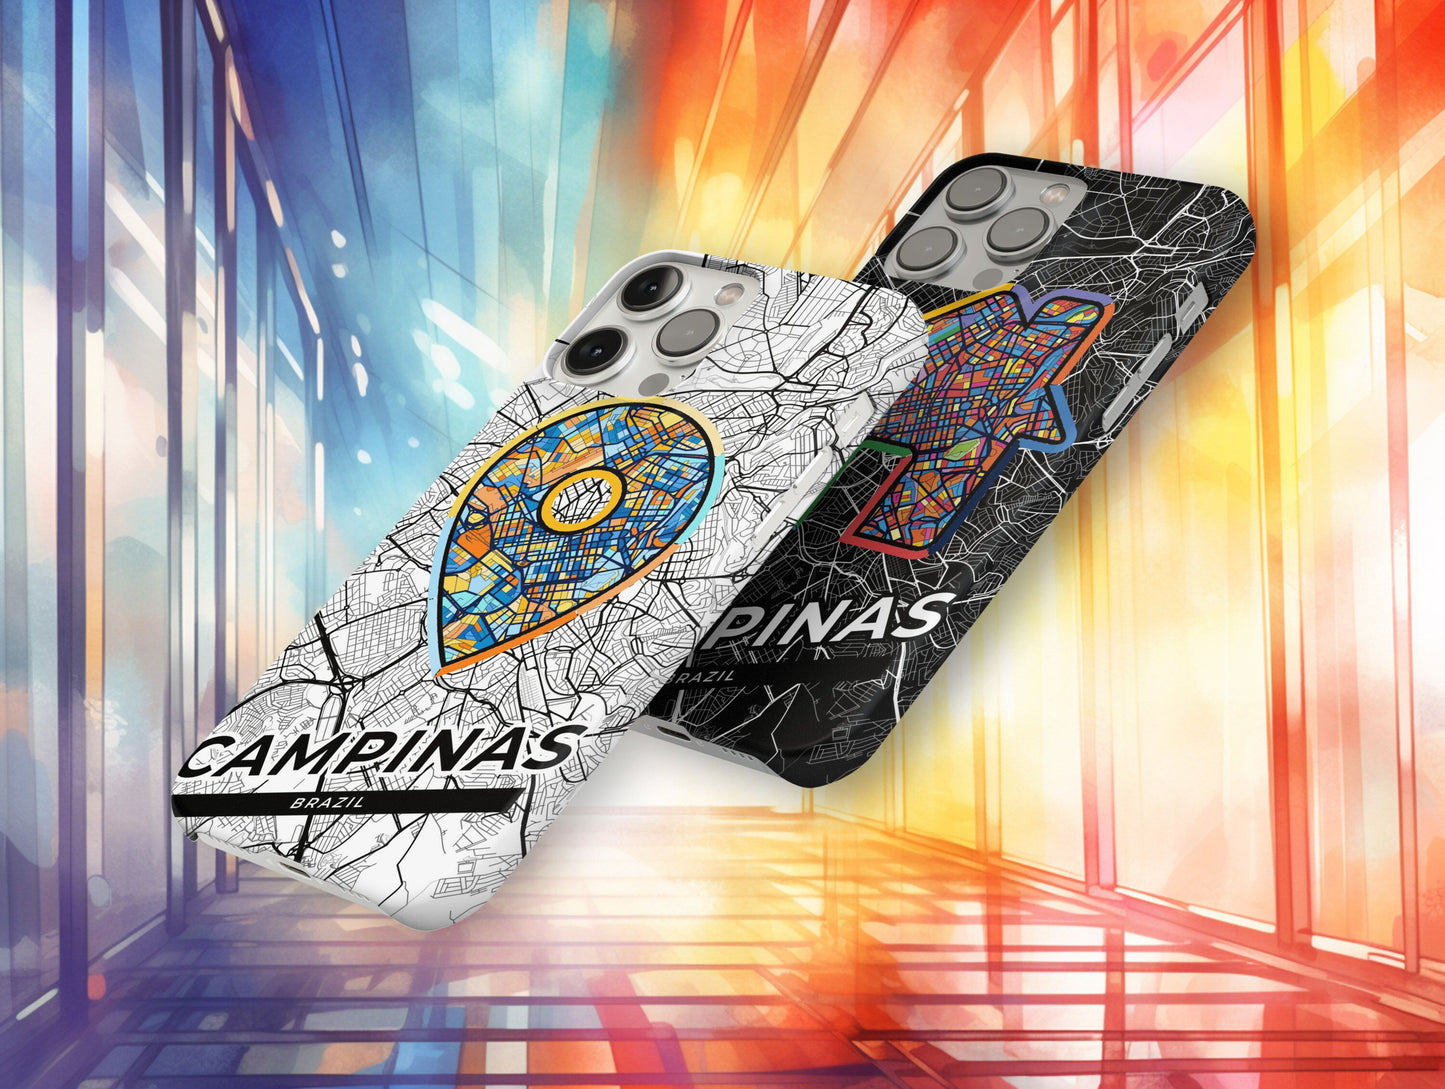 Campinas Brazil slim phone case with colorful icon. Birthday, wedding or housewarming gift. Couple match cases.